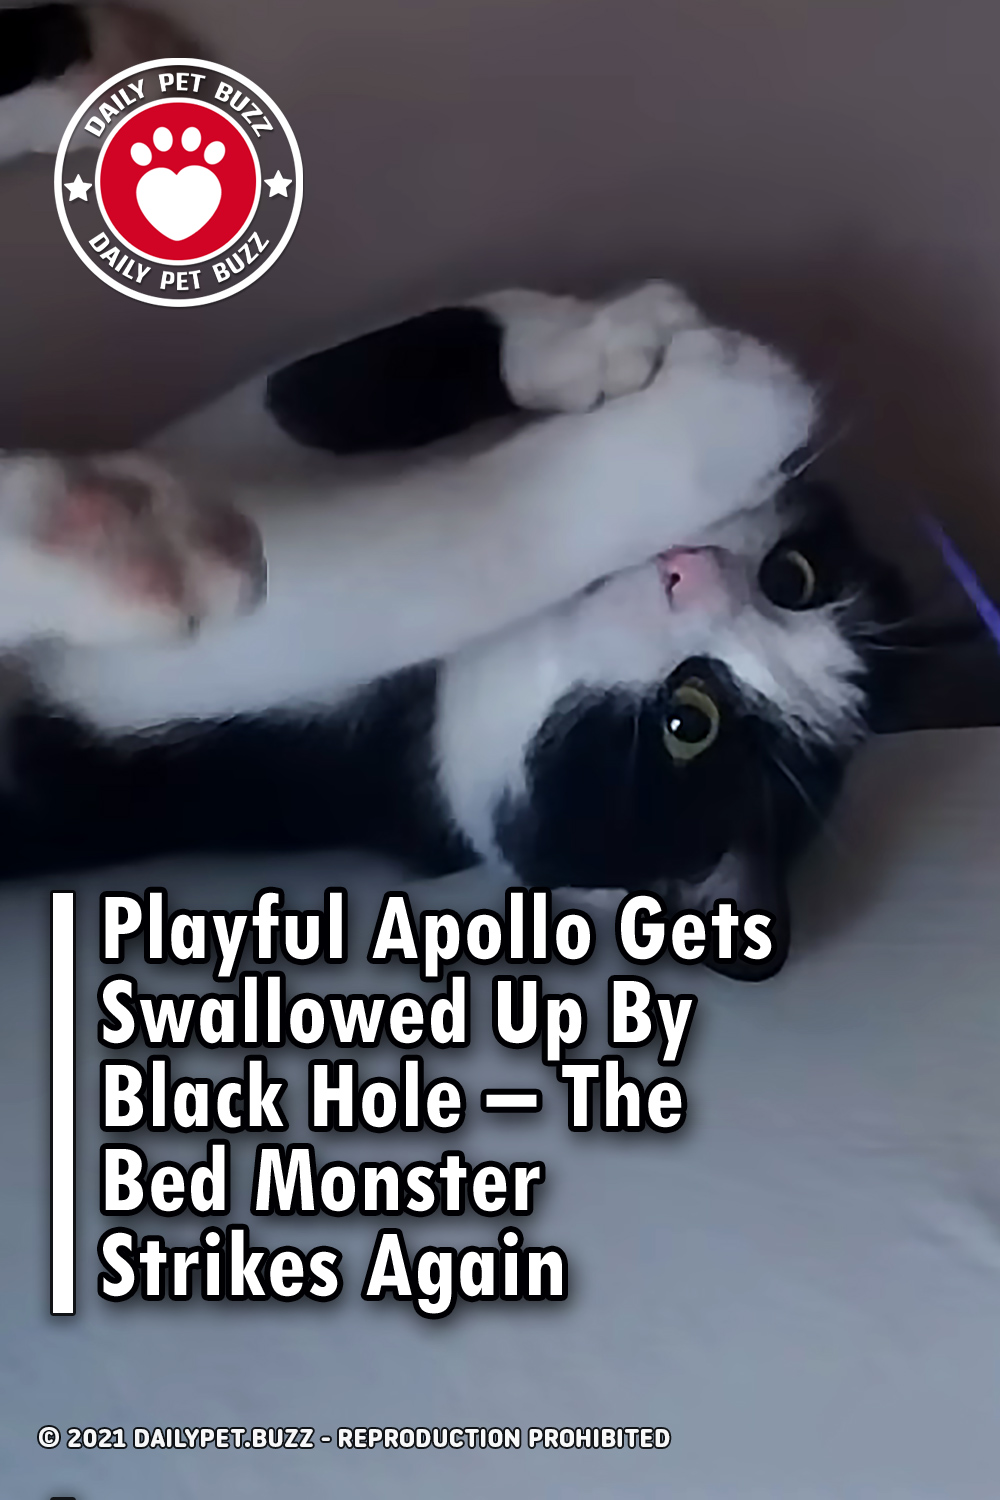 Playful Apollo Gets Swallowed Up By Black Hole – The Bed Monster Strikes Again